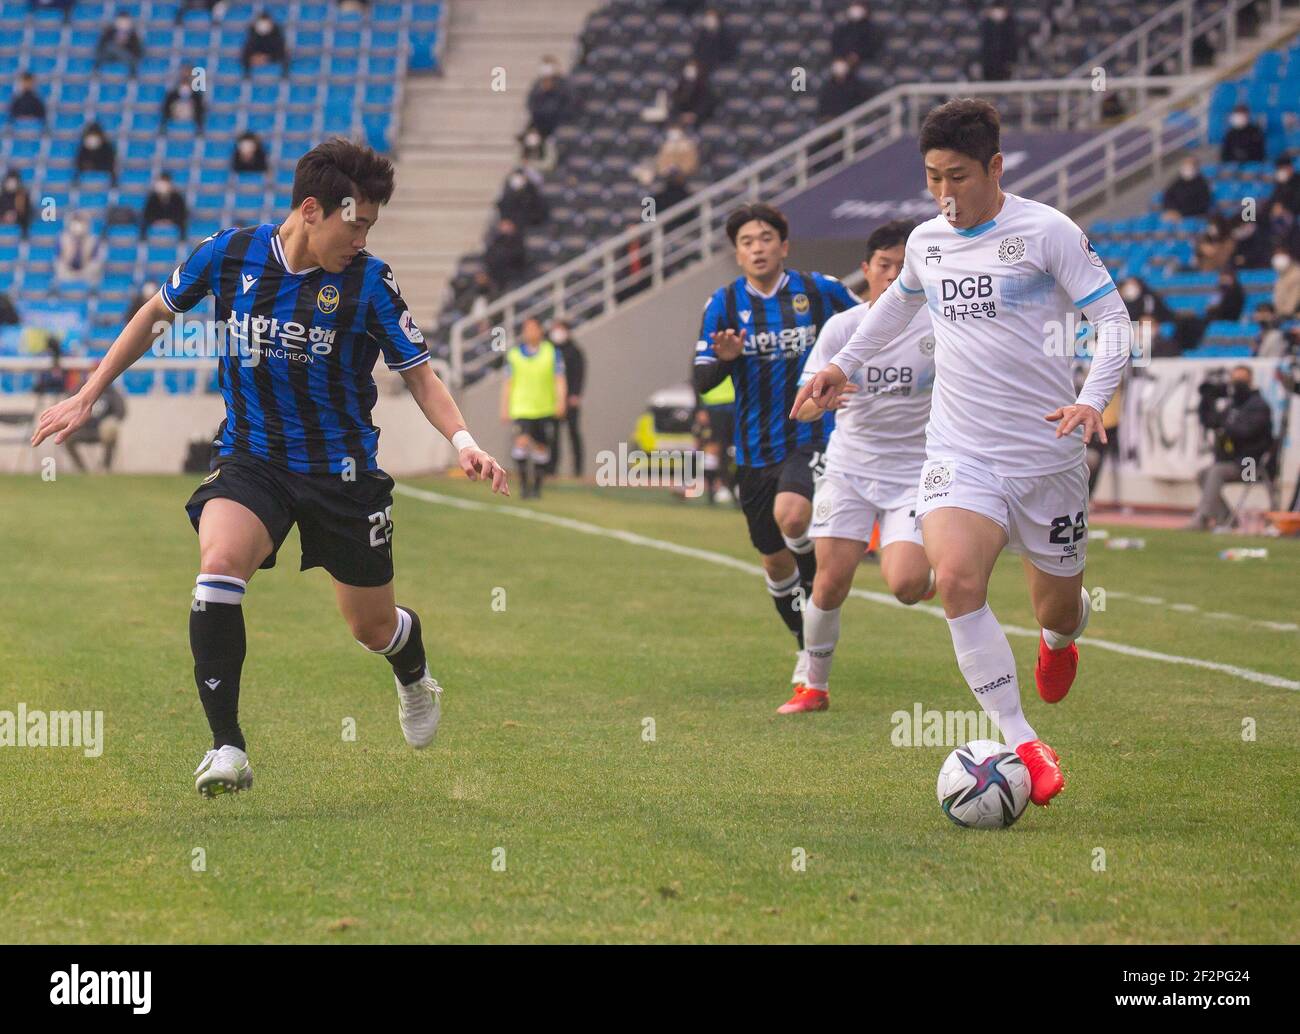 Incheon, South Korea. 06th Mar, 2021. Kim Jun-Yub (L) of Incheon United FC and Lee Keun-Ho (front R) of Daegu FC in action during the 2nd round of the 2021 K League 1 soccer match between Incheon United FC and Daegu FC at the Incheon Football Stadium.(Final score; Incheon United FC 2:1 Daegu FC) (Photo by Jaewon Lee/SOPA Images/Sipa USA) Credit: Sipa USA/Alamy Live News Stock Photo